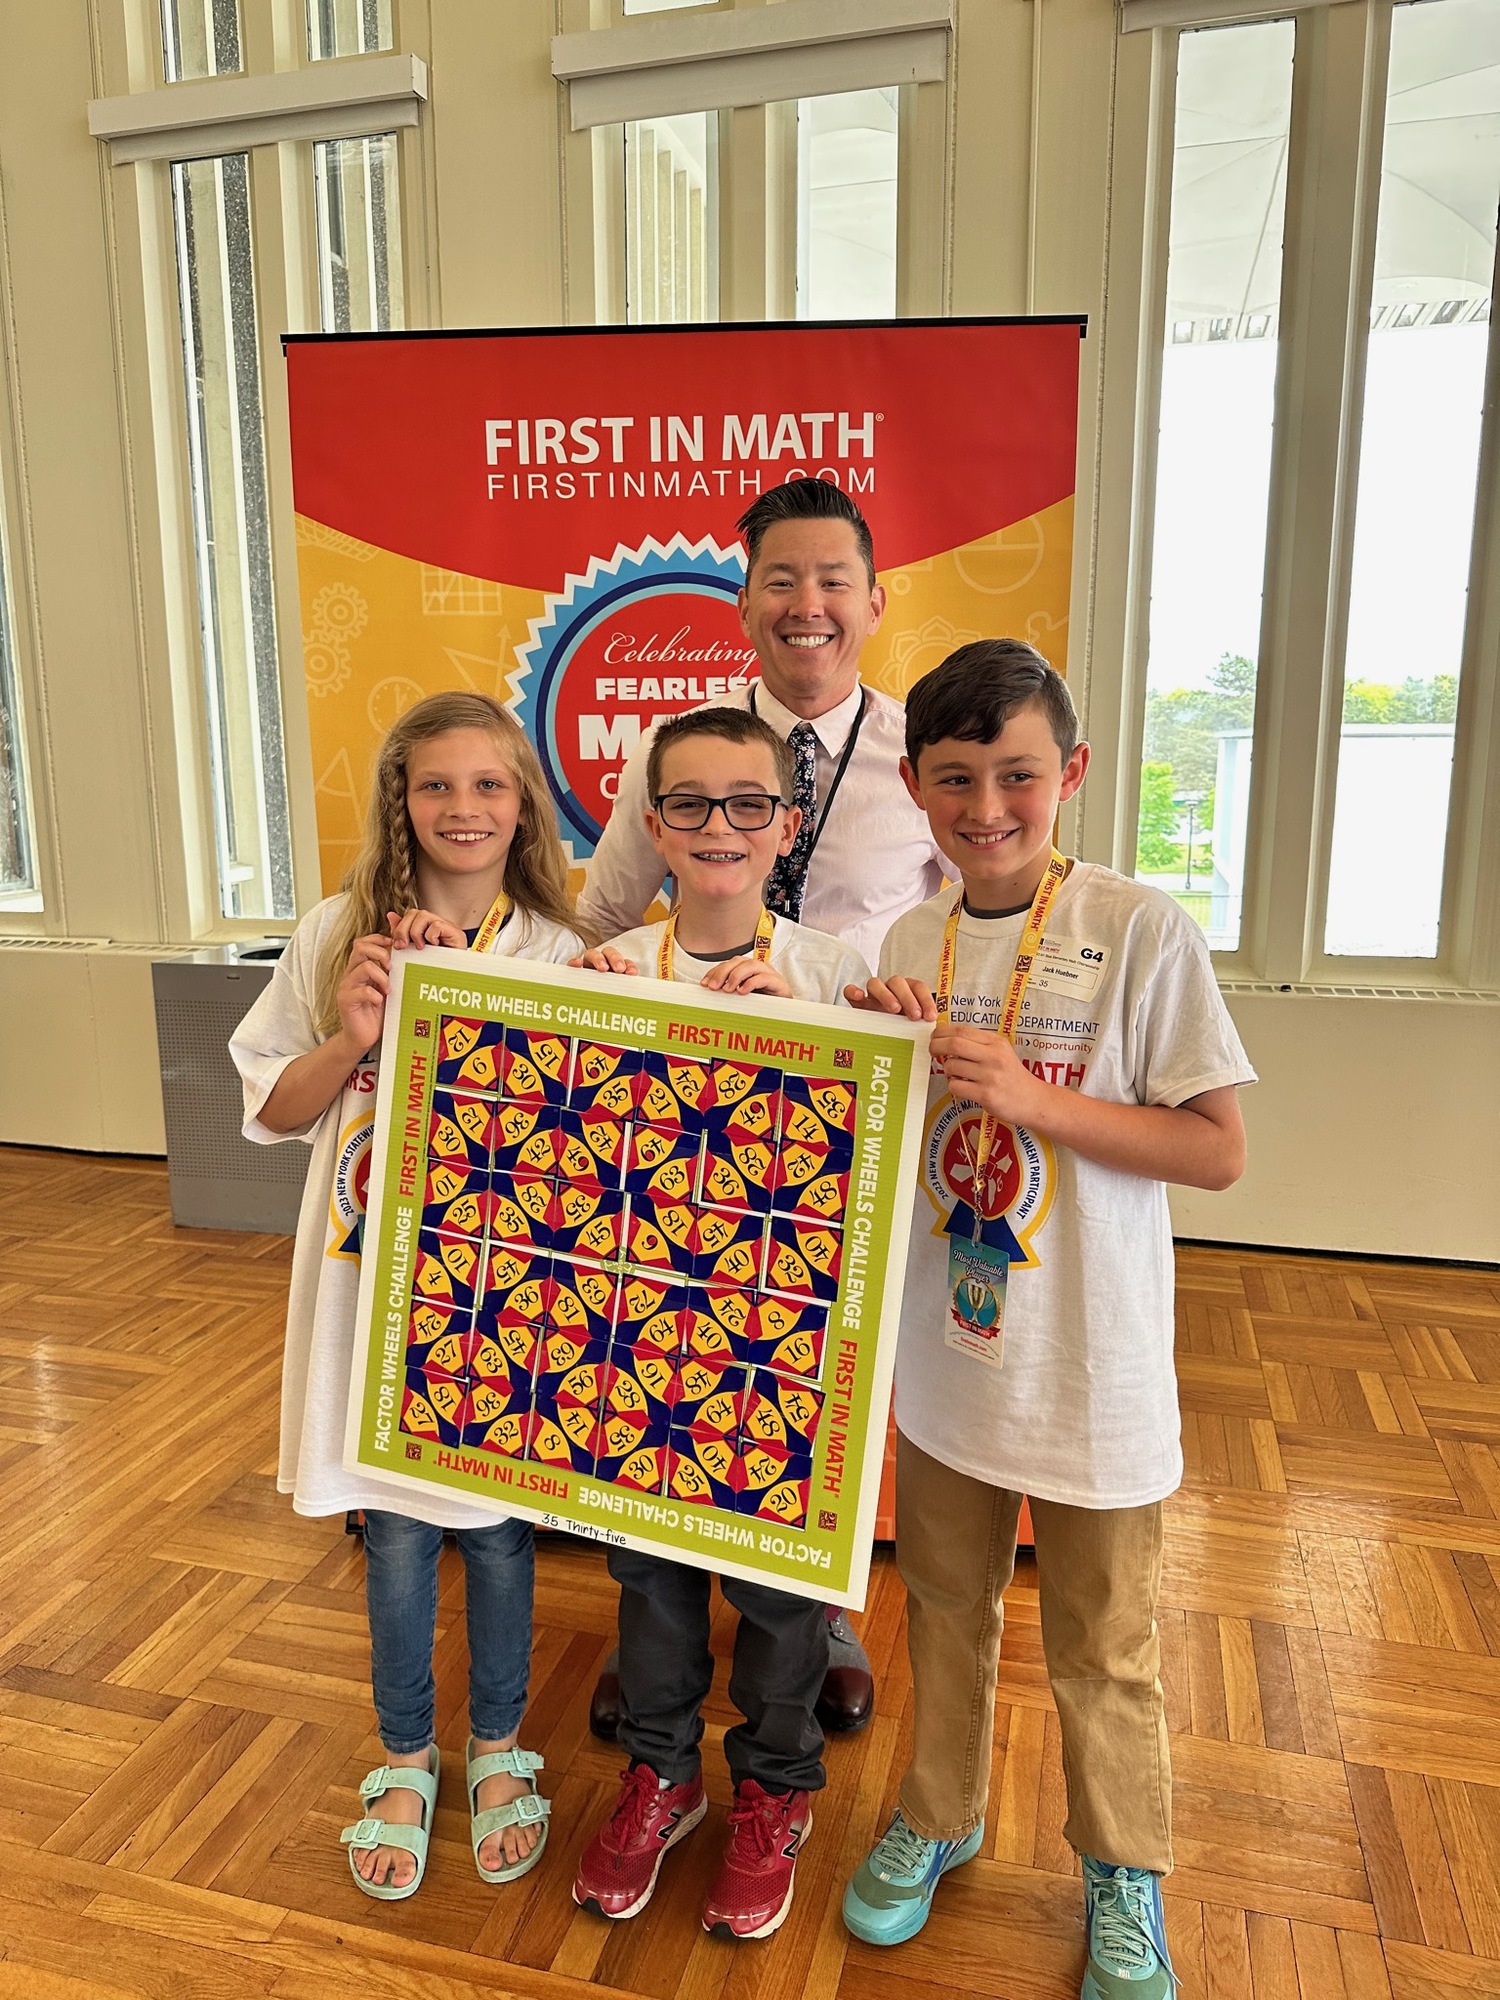 Three Hampton Bays Elementary School fourth graders, from left, William Loudenslager, Jack Huebner and Annabel Ramsay, took third place at the 2023 New York State Education Department First in Math Tournament held in Albany on May 20. The students earned their spots in the competition after receiving top scores on a 15-minute, online tournament qualifier test. They were among a select group of students from only seven schools on Long Island and 150 across the state to have qualified. COURTESY HAMPTON BAYS SCHOOL DISTRICT